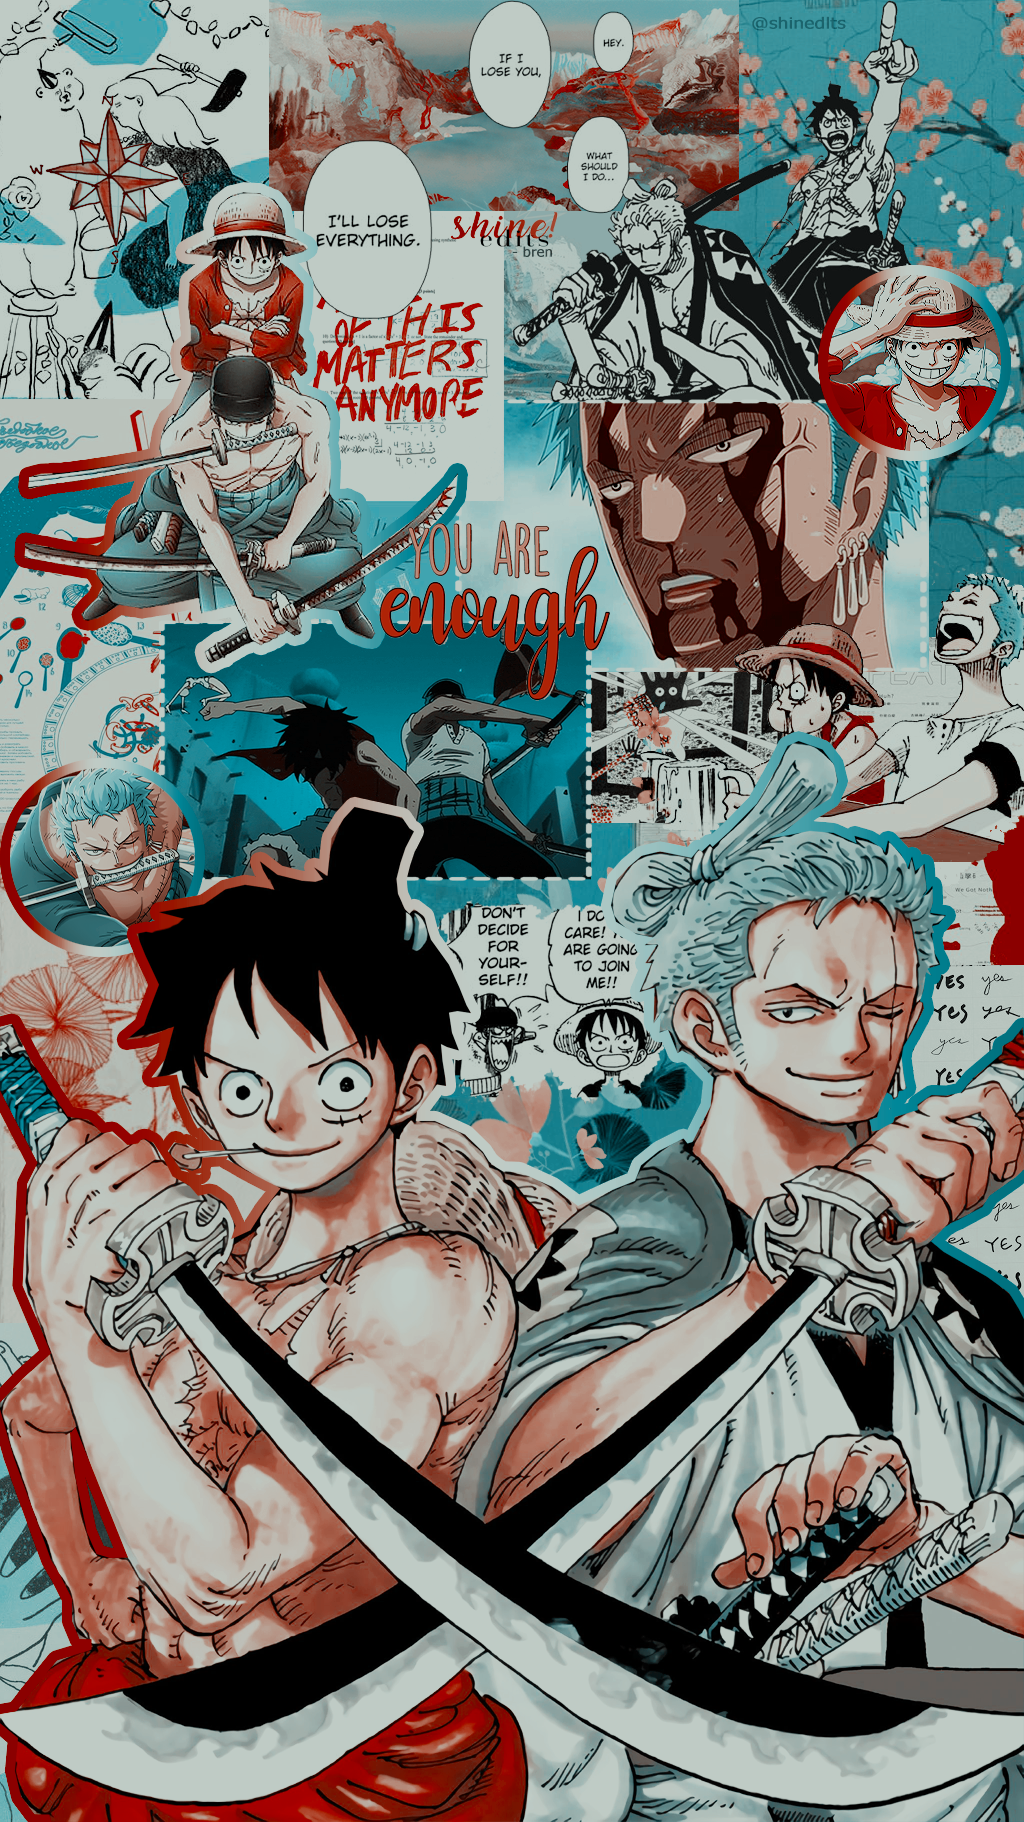 Free download One Piece iphone Wallpaper EnJpg 1280x2120 for your Desktop  Mobile  Tablet  Explore 38 One Piece Anime iPhone Wallpapers  One Piece  Anime Wallpaper One Piece Wallpapers One Piece Zoro Wallpaper